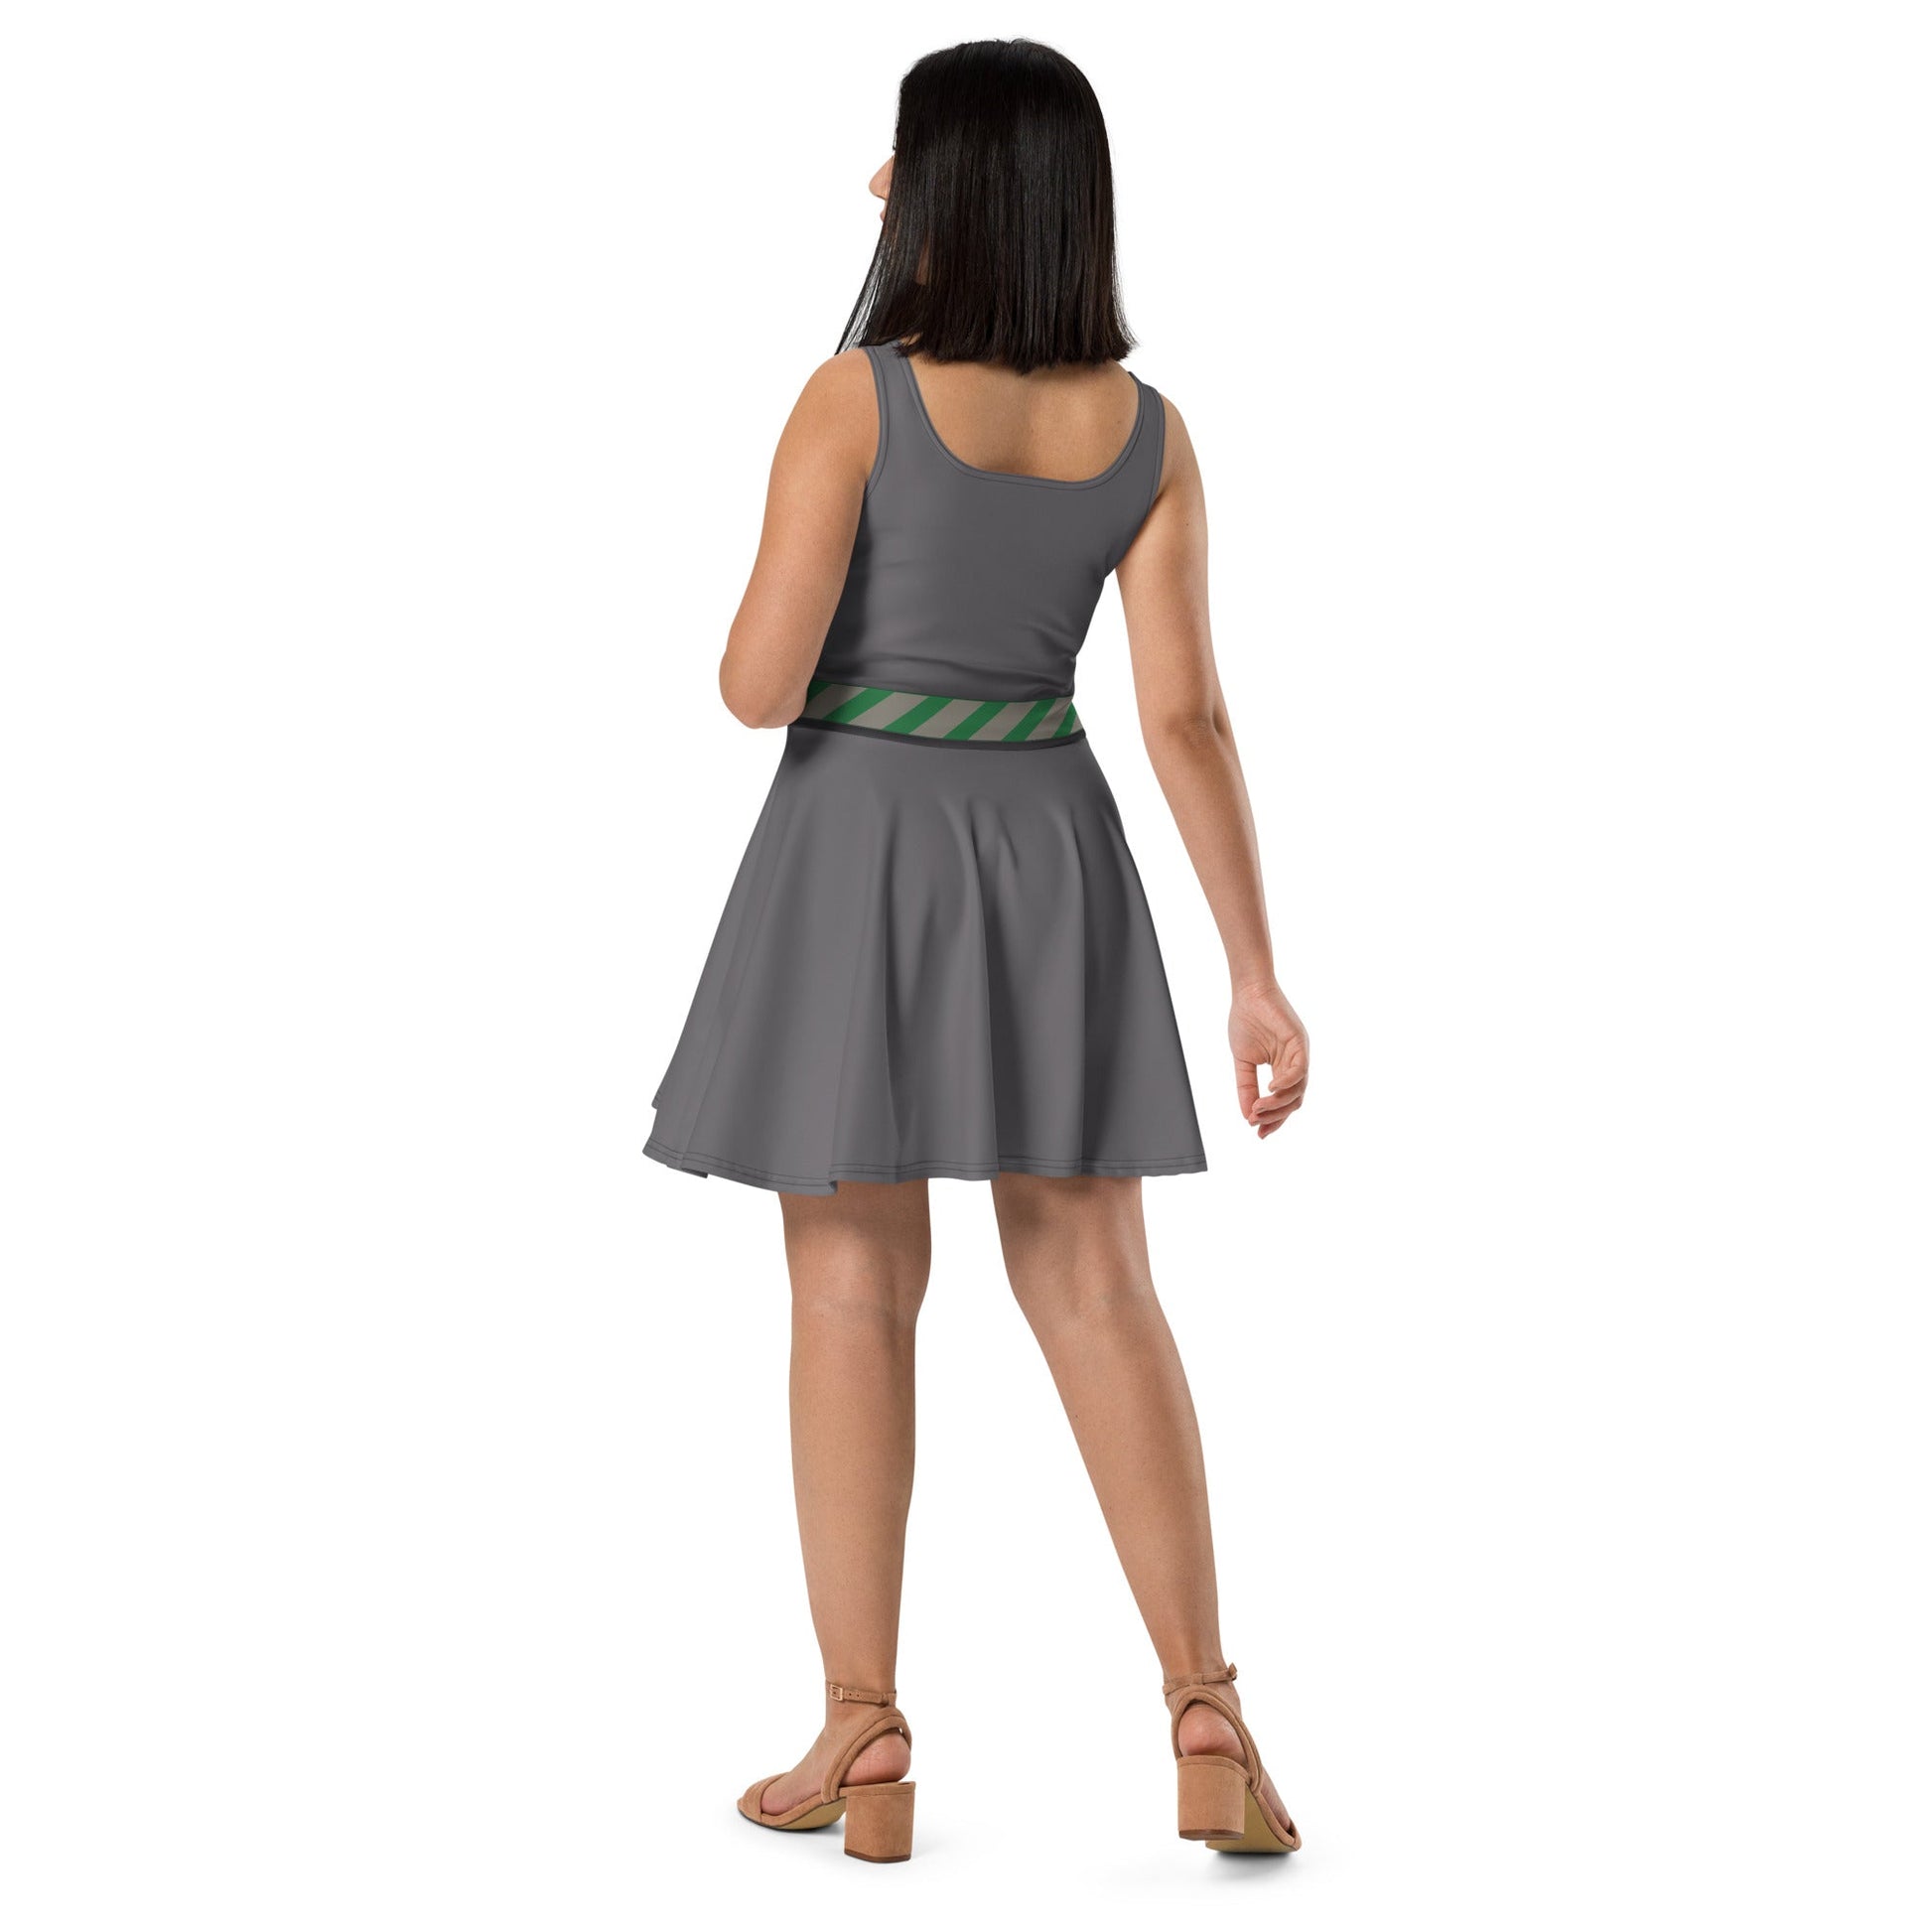 The Cunning House Skater Dress adult cosplayadult costumeWrong Lever Clothing